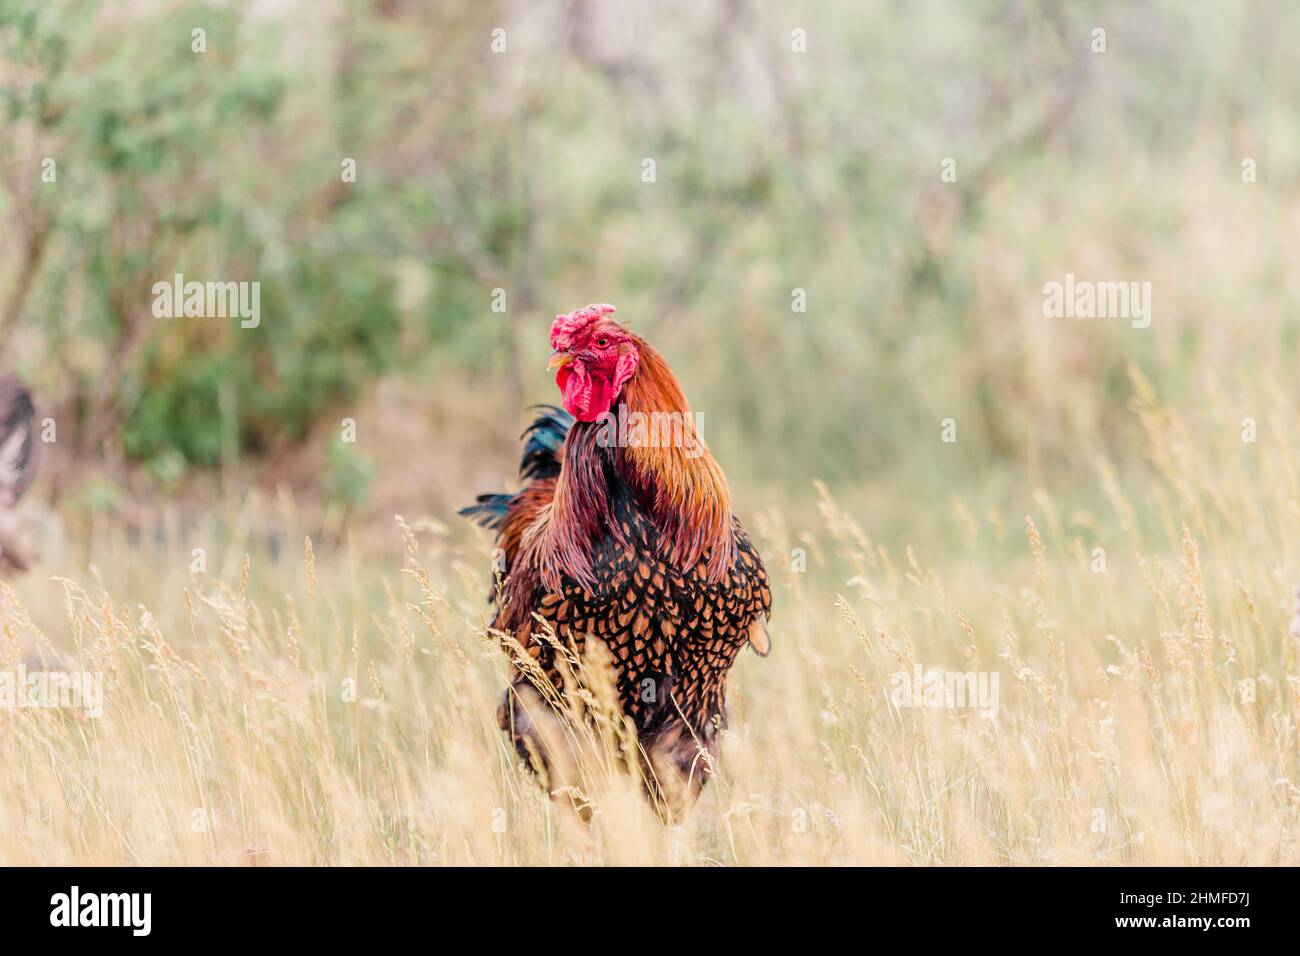 Oro laced Wyanotte Rooster Free Ranging Foto Stock